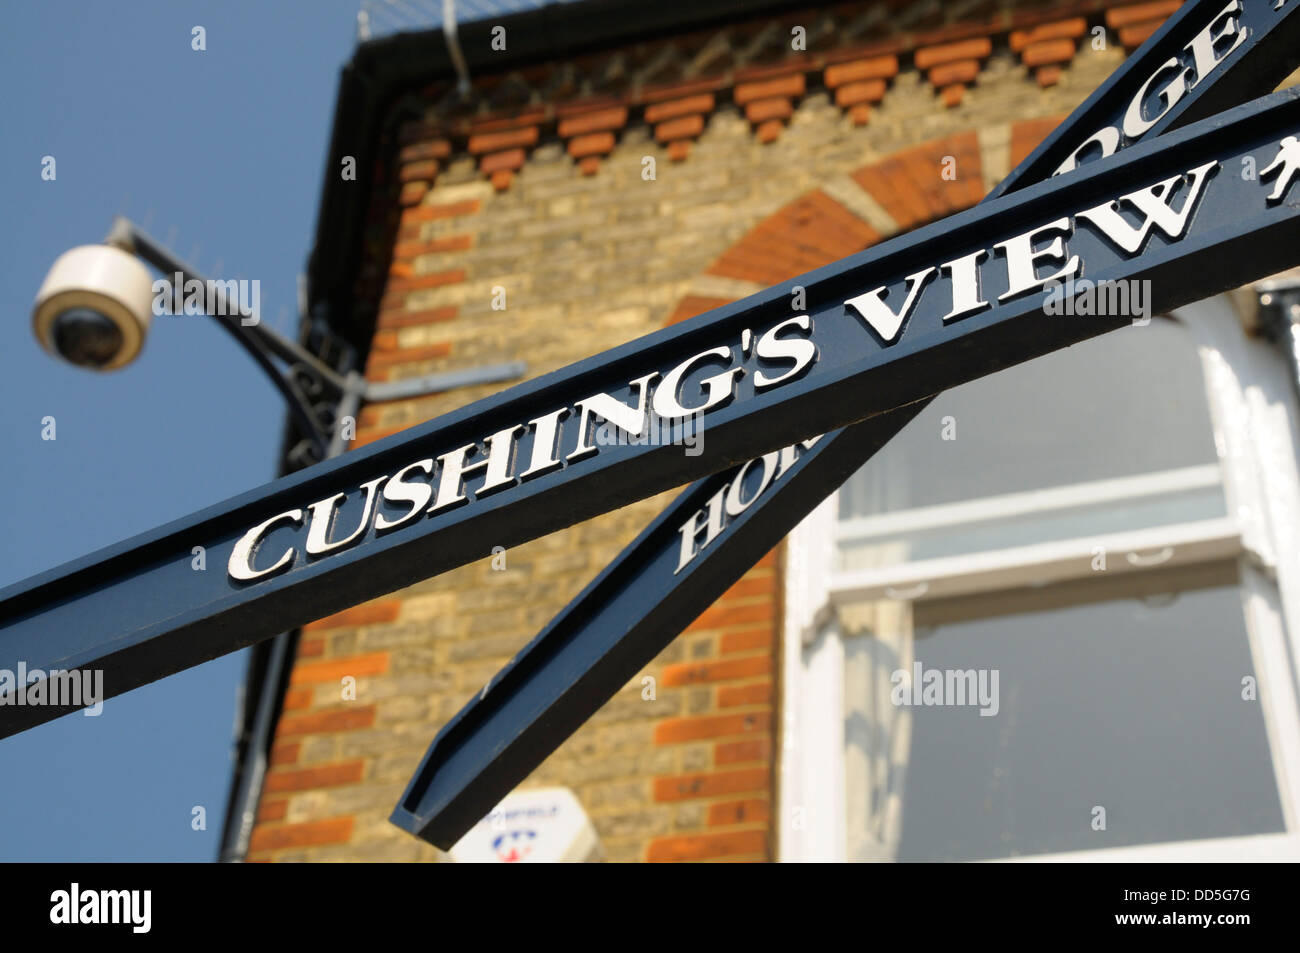 Whitstable, Kent, England, UK. Signpost to 'Cushing's View', named after local resident Peter Cushing Stock Photo